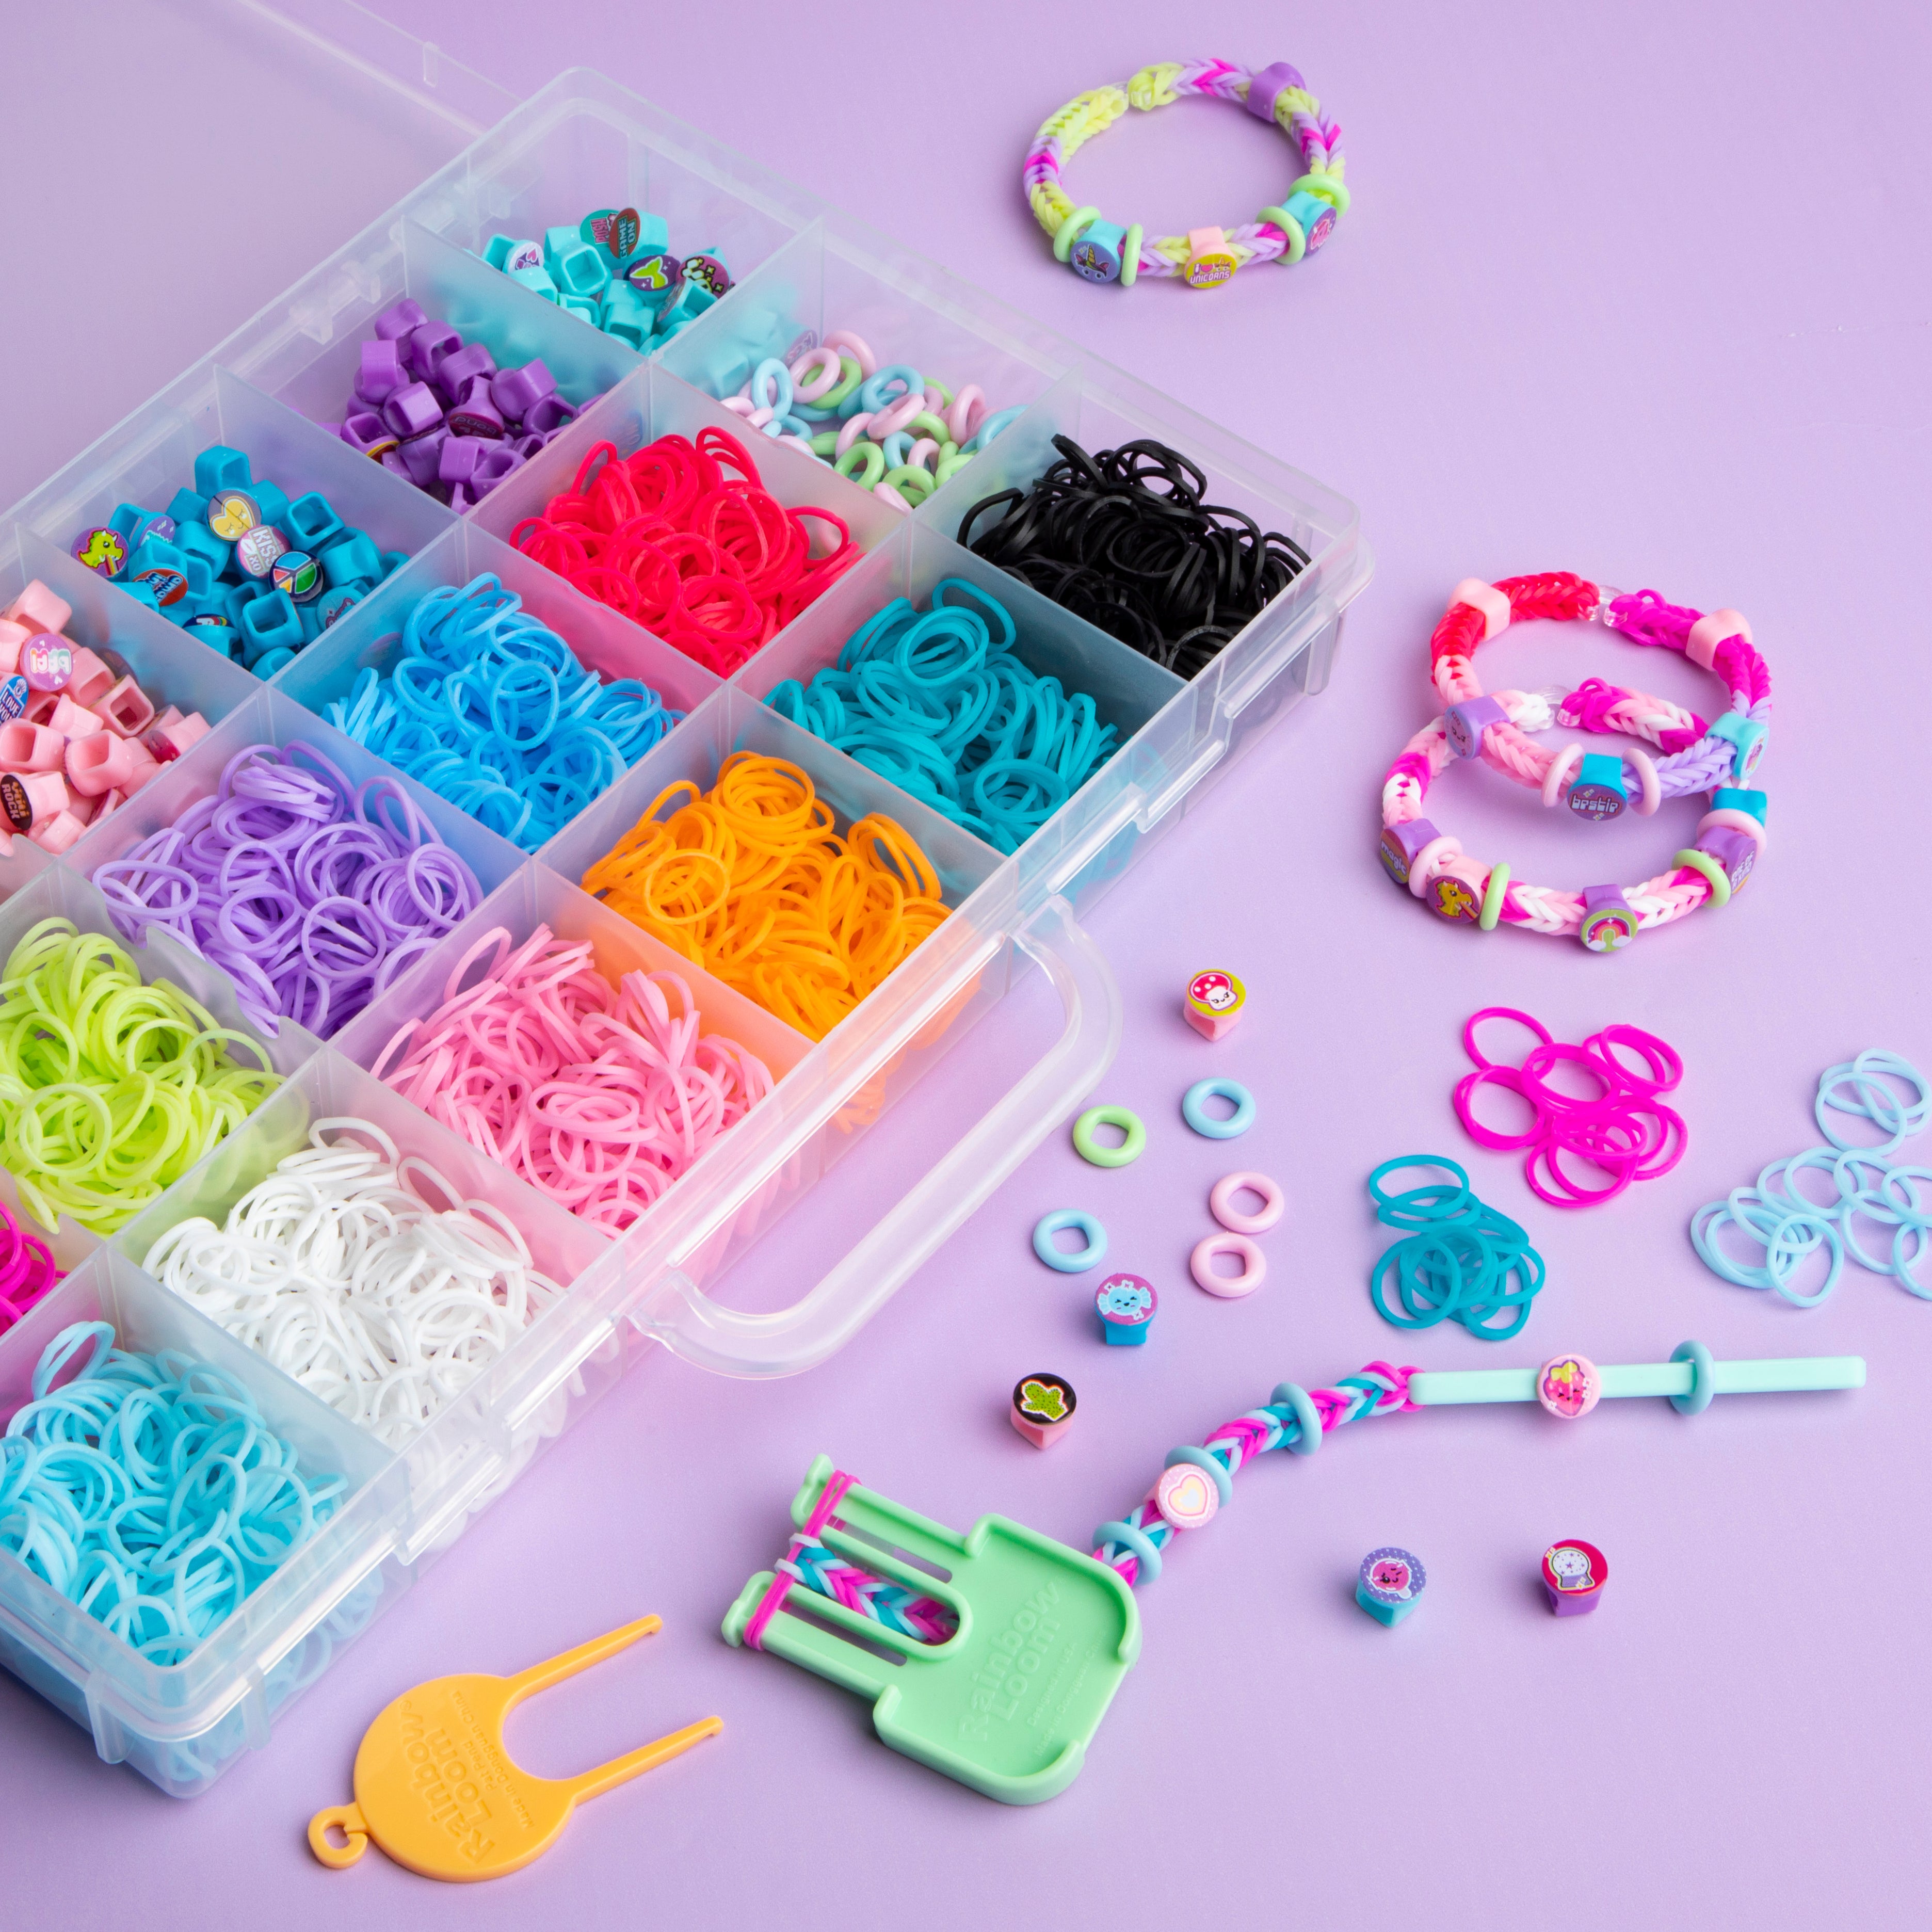 3500+ Rubber Loom Bands Colorful Loom Beads Storage Box Set with